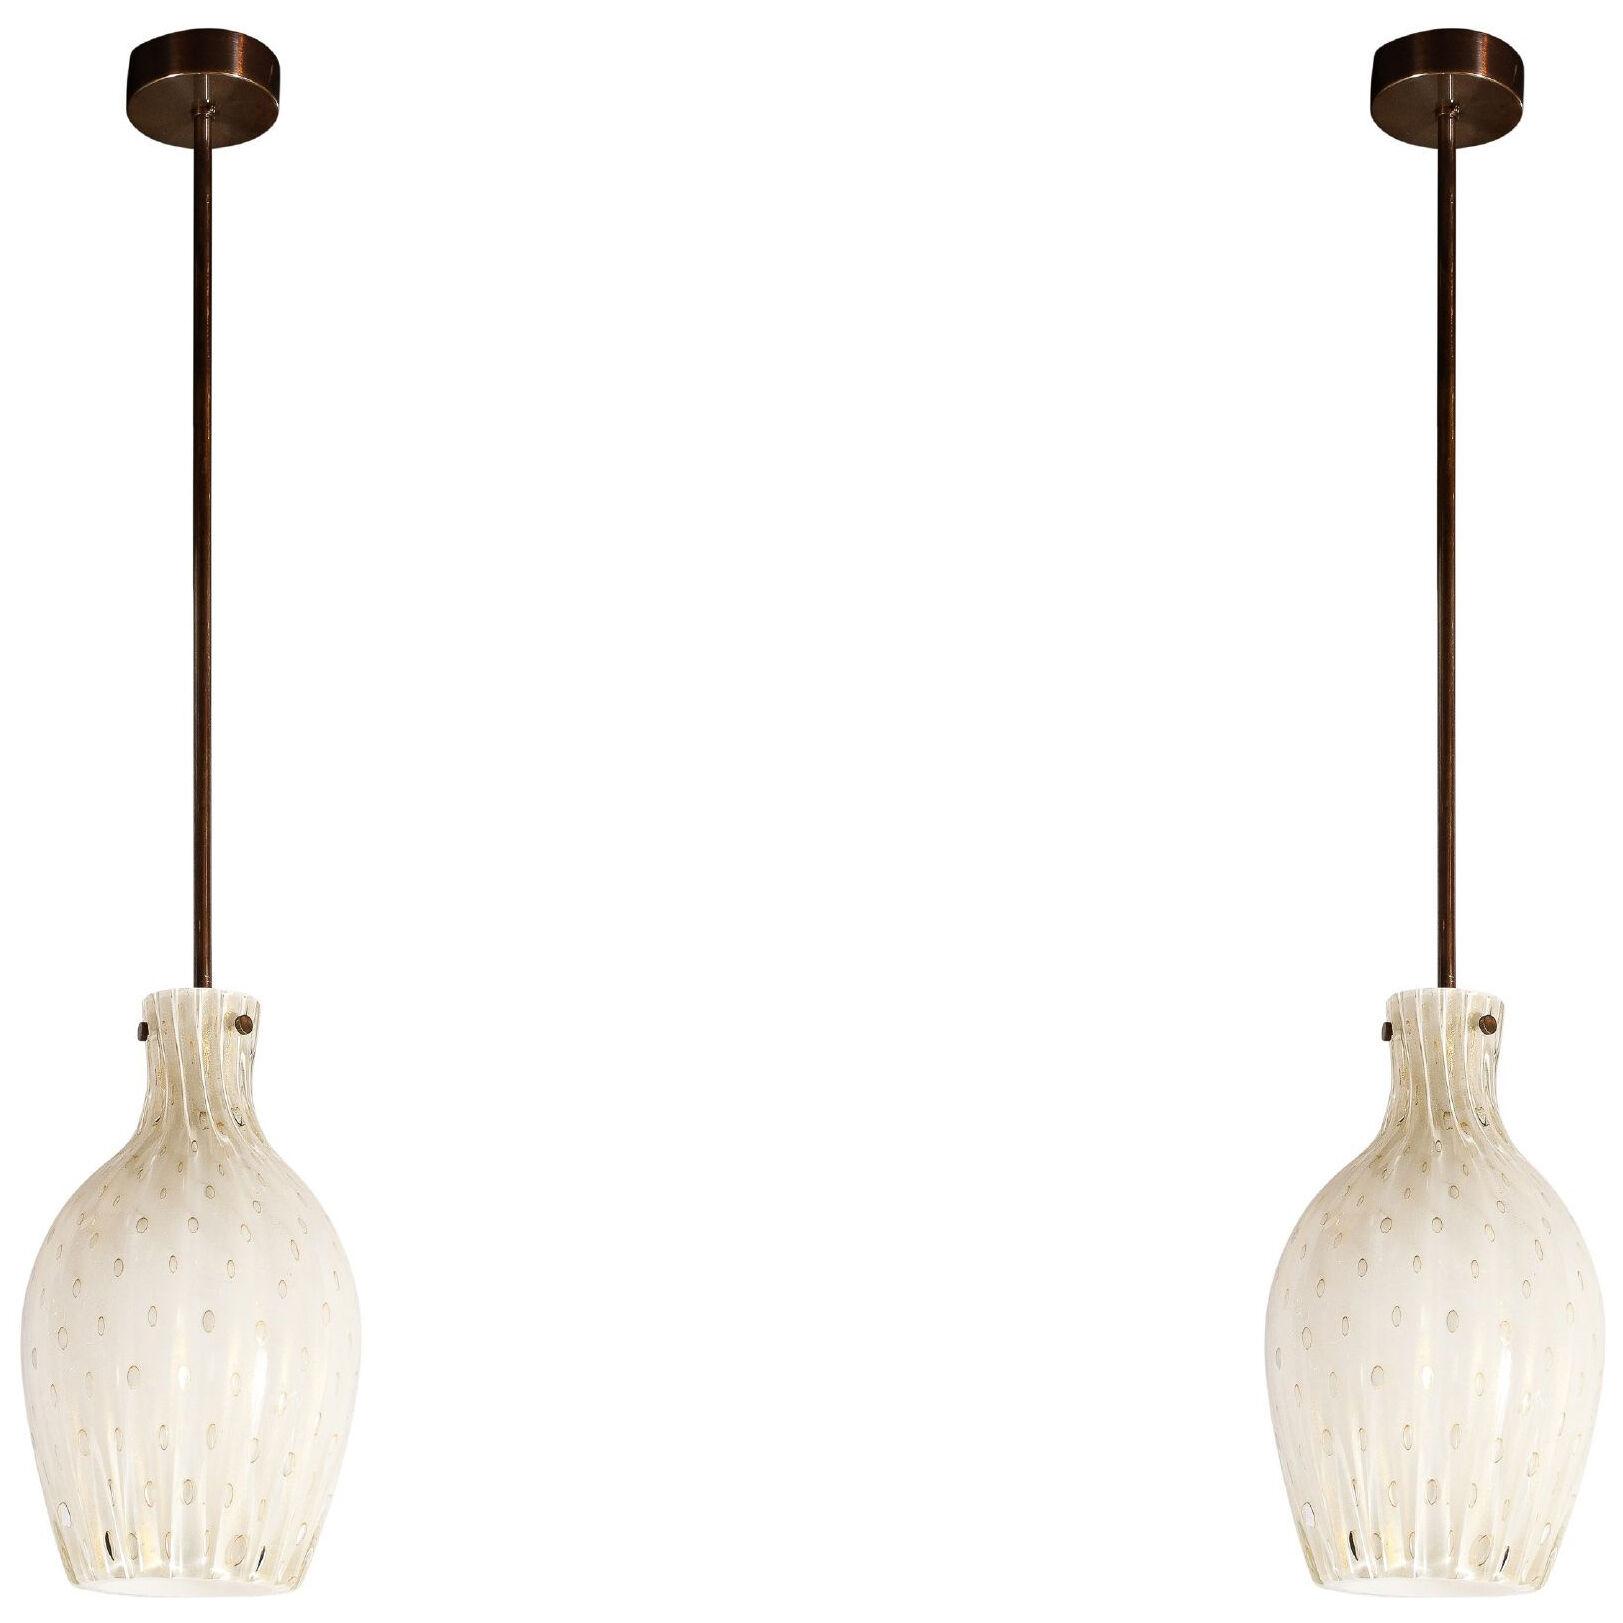 Pair of Fluted Urn-Form Murano White Glass Pendants with Antiqued Brass Fittings